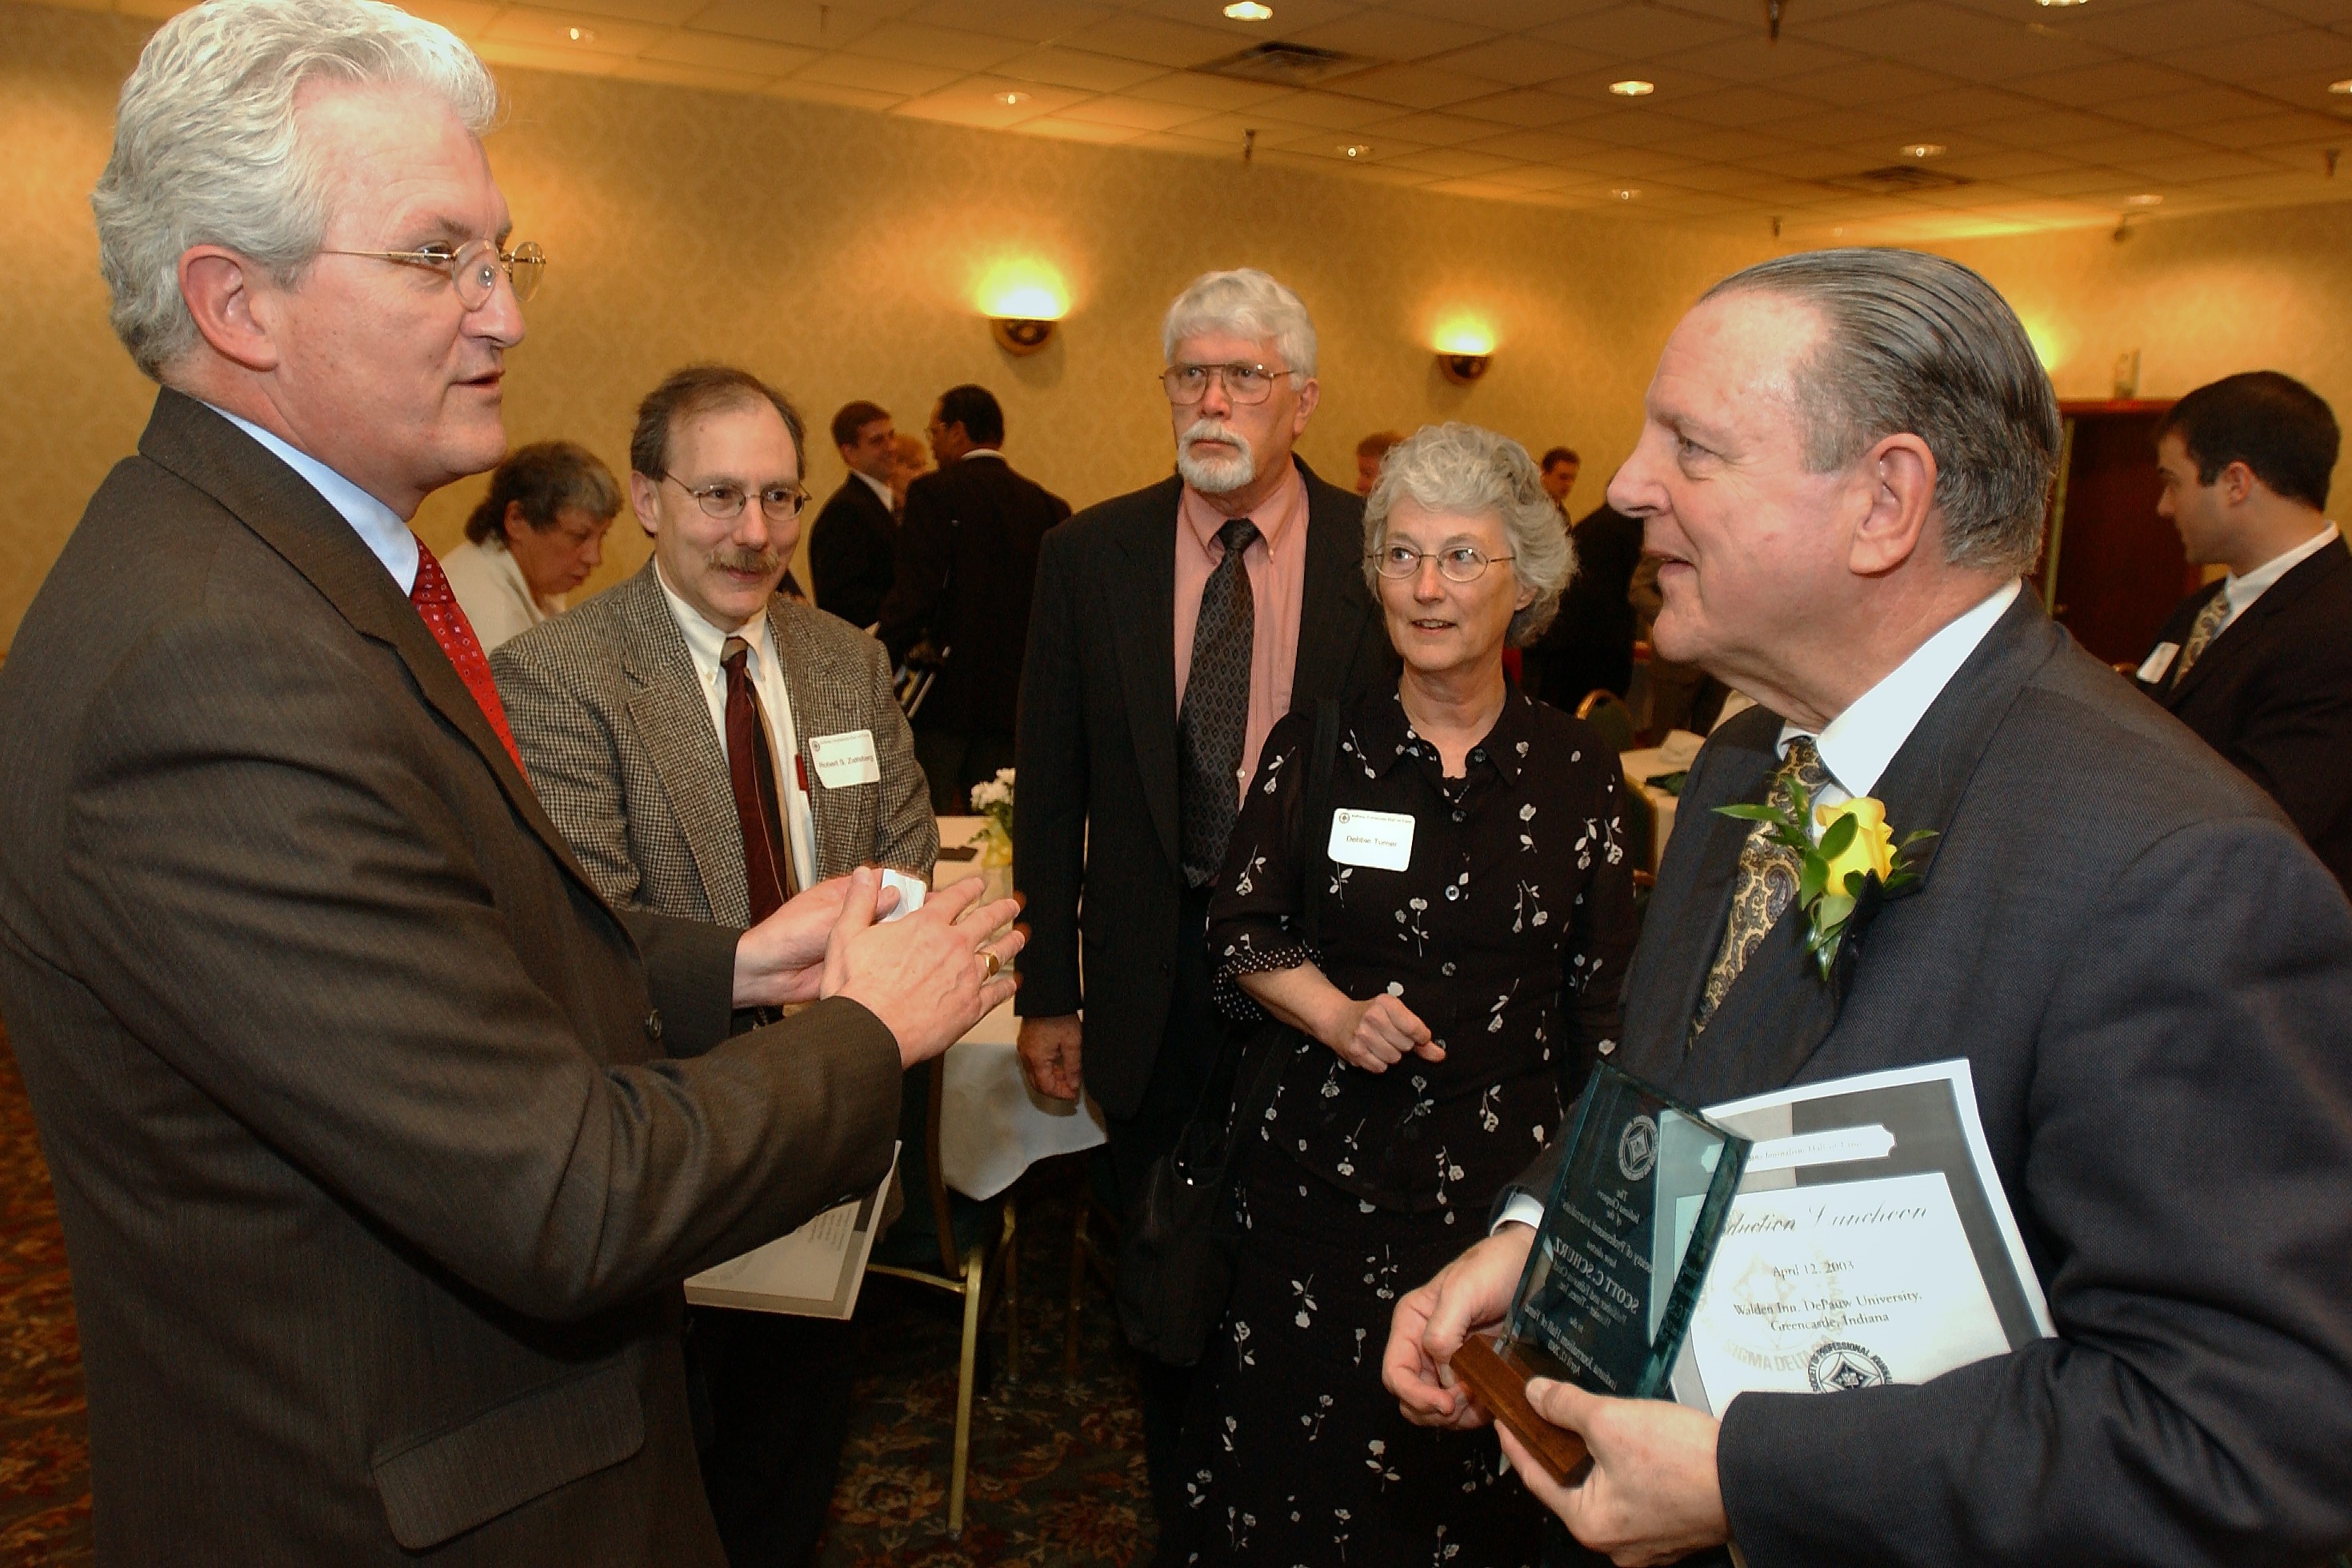 Scott Schurz (far right) is congratulated by incoming HT editor Mayer Maloney after being inducted into the Indiana Journalism Hall of Fame, April 2003.